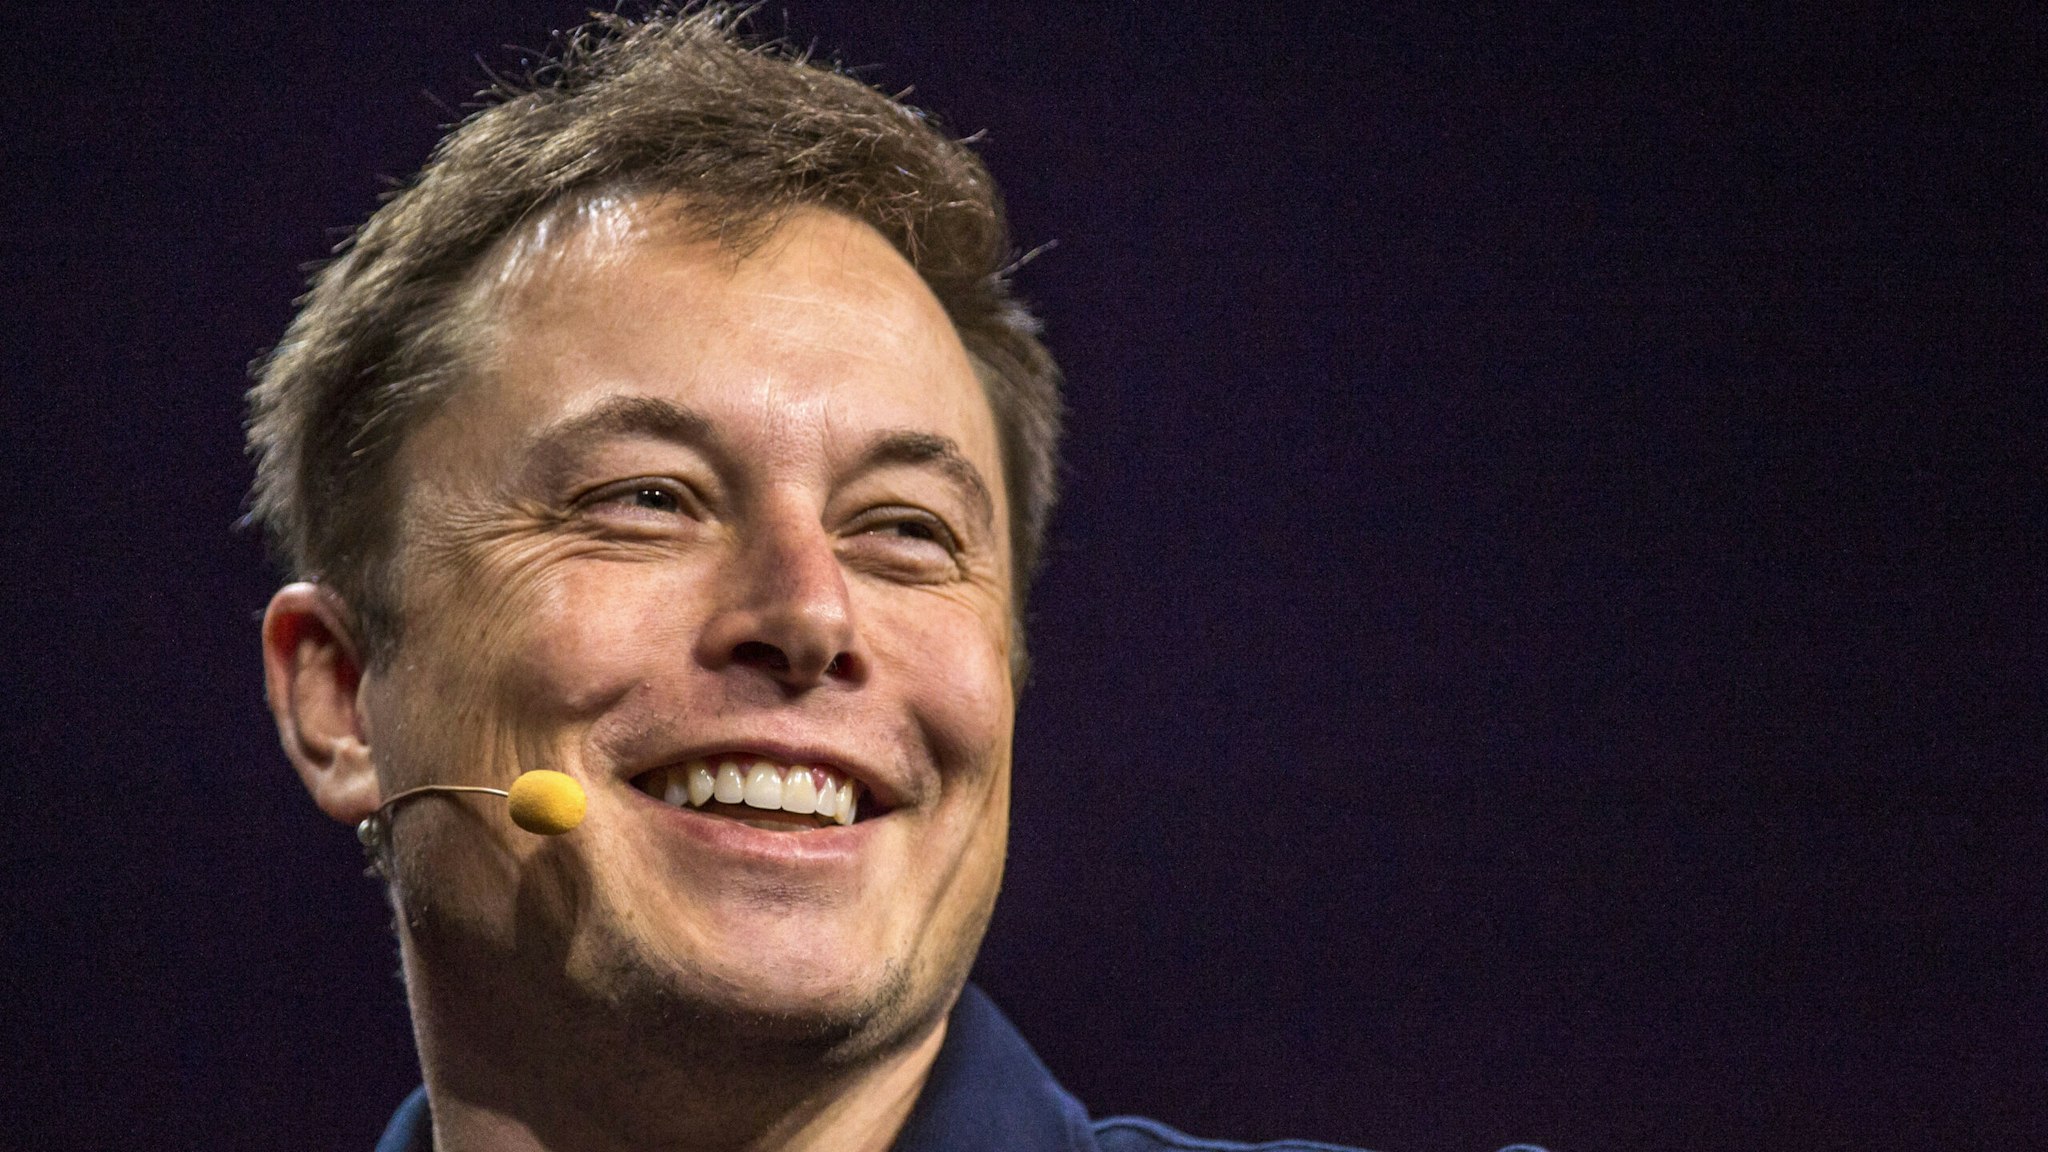 Elon Musk, co-founder and chief executive officer of Tesla Motors Inc., smiles during the GPU Technology Conference (GTC) in San Jose, California, U.S., on Tuesday, March 17, 2015. Musk said that well take autonomous cars for granted in a short period of time and signaled that the automaker plans to be a leader in the nascent market.